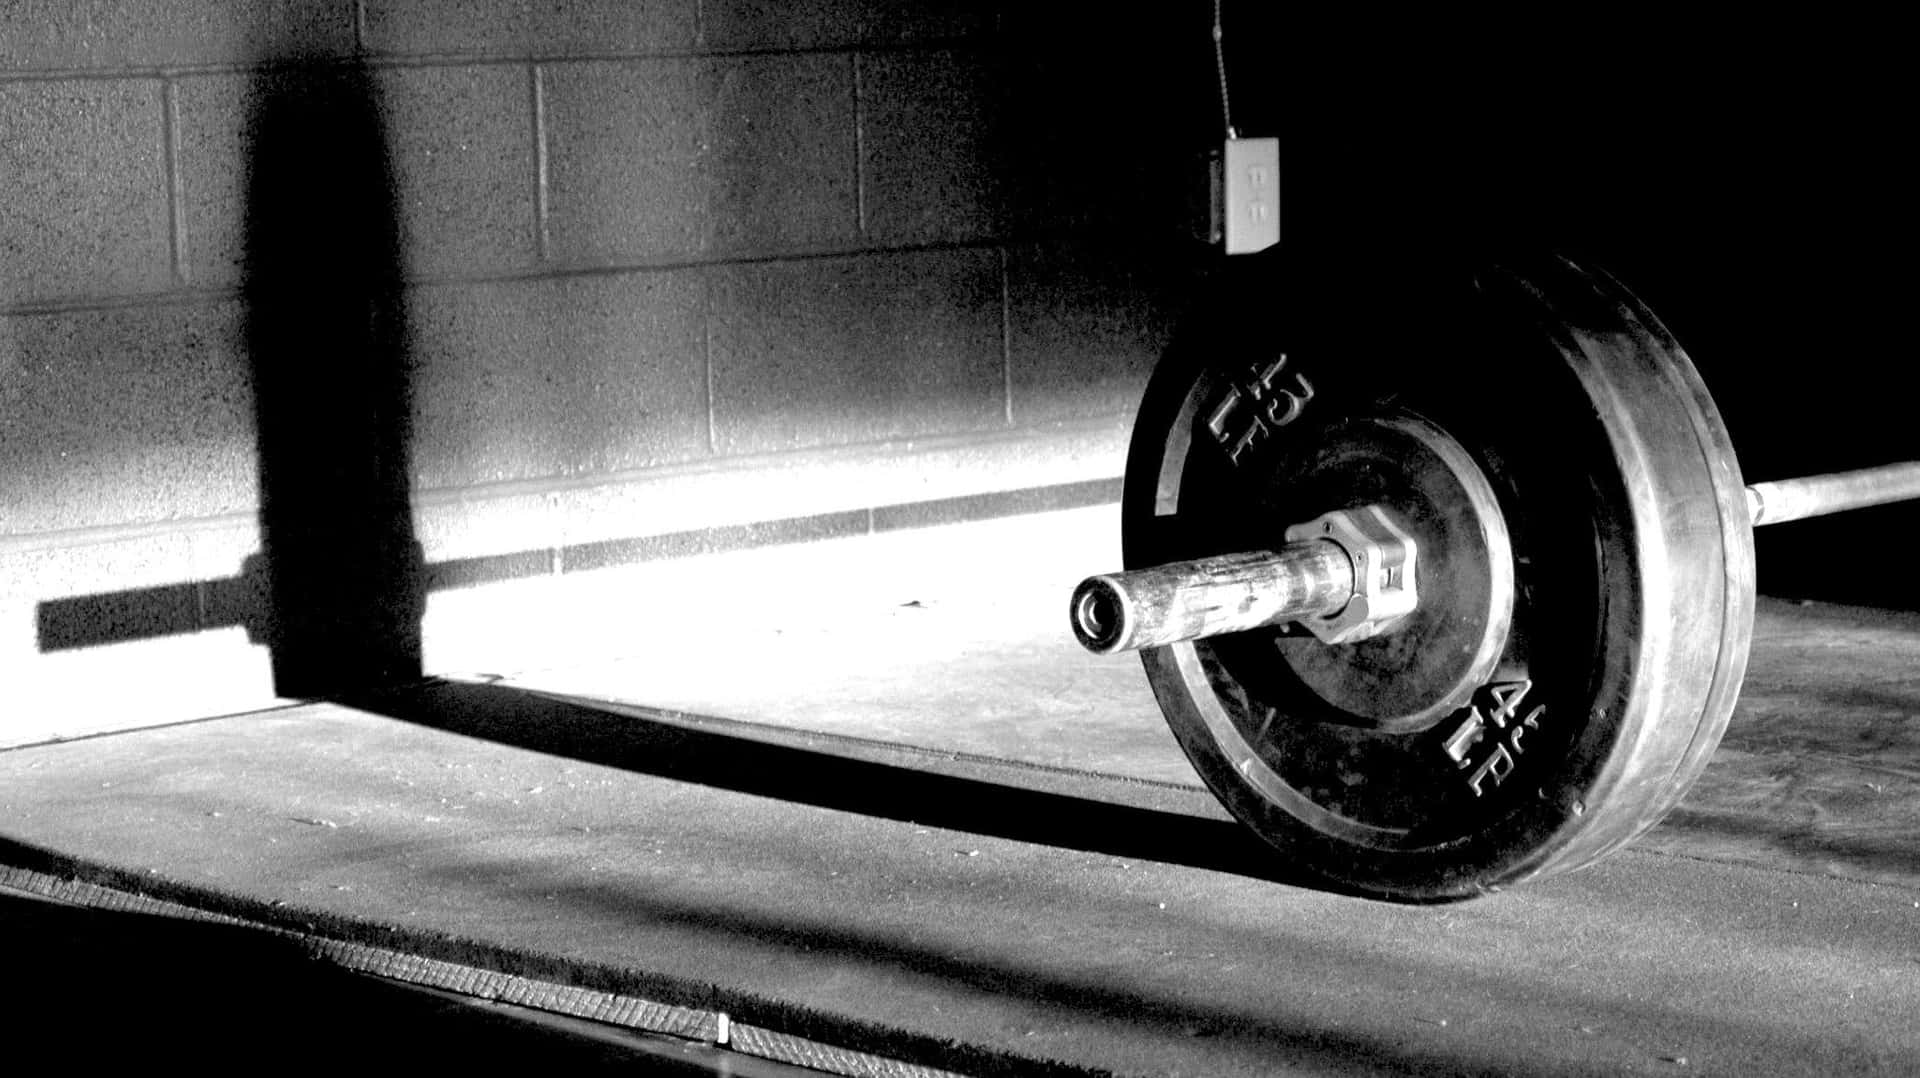 Picking up heavy weights with one hand using a barbell to build strength and power